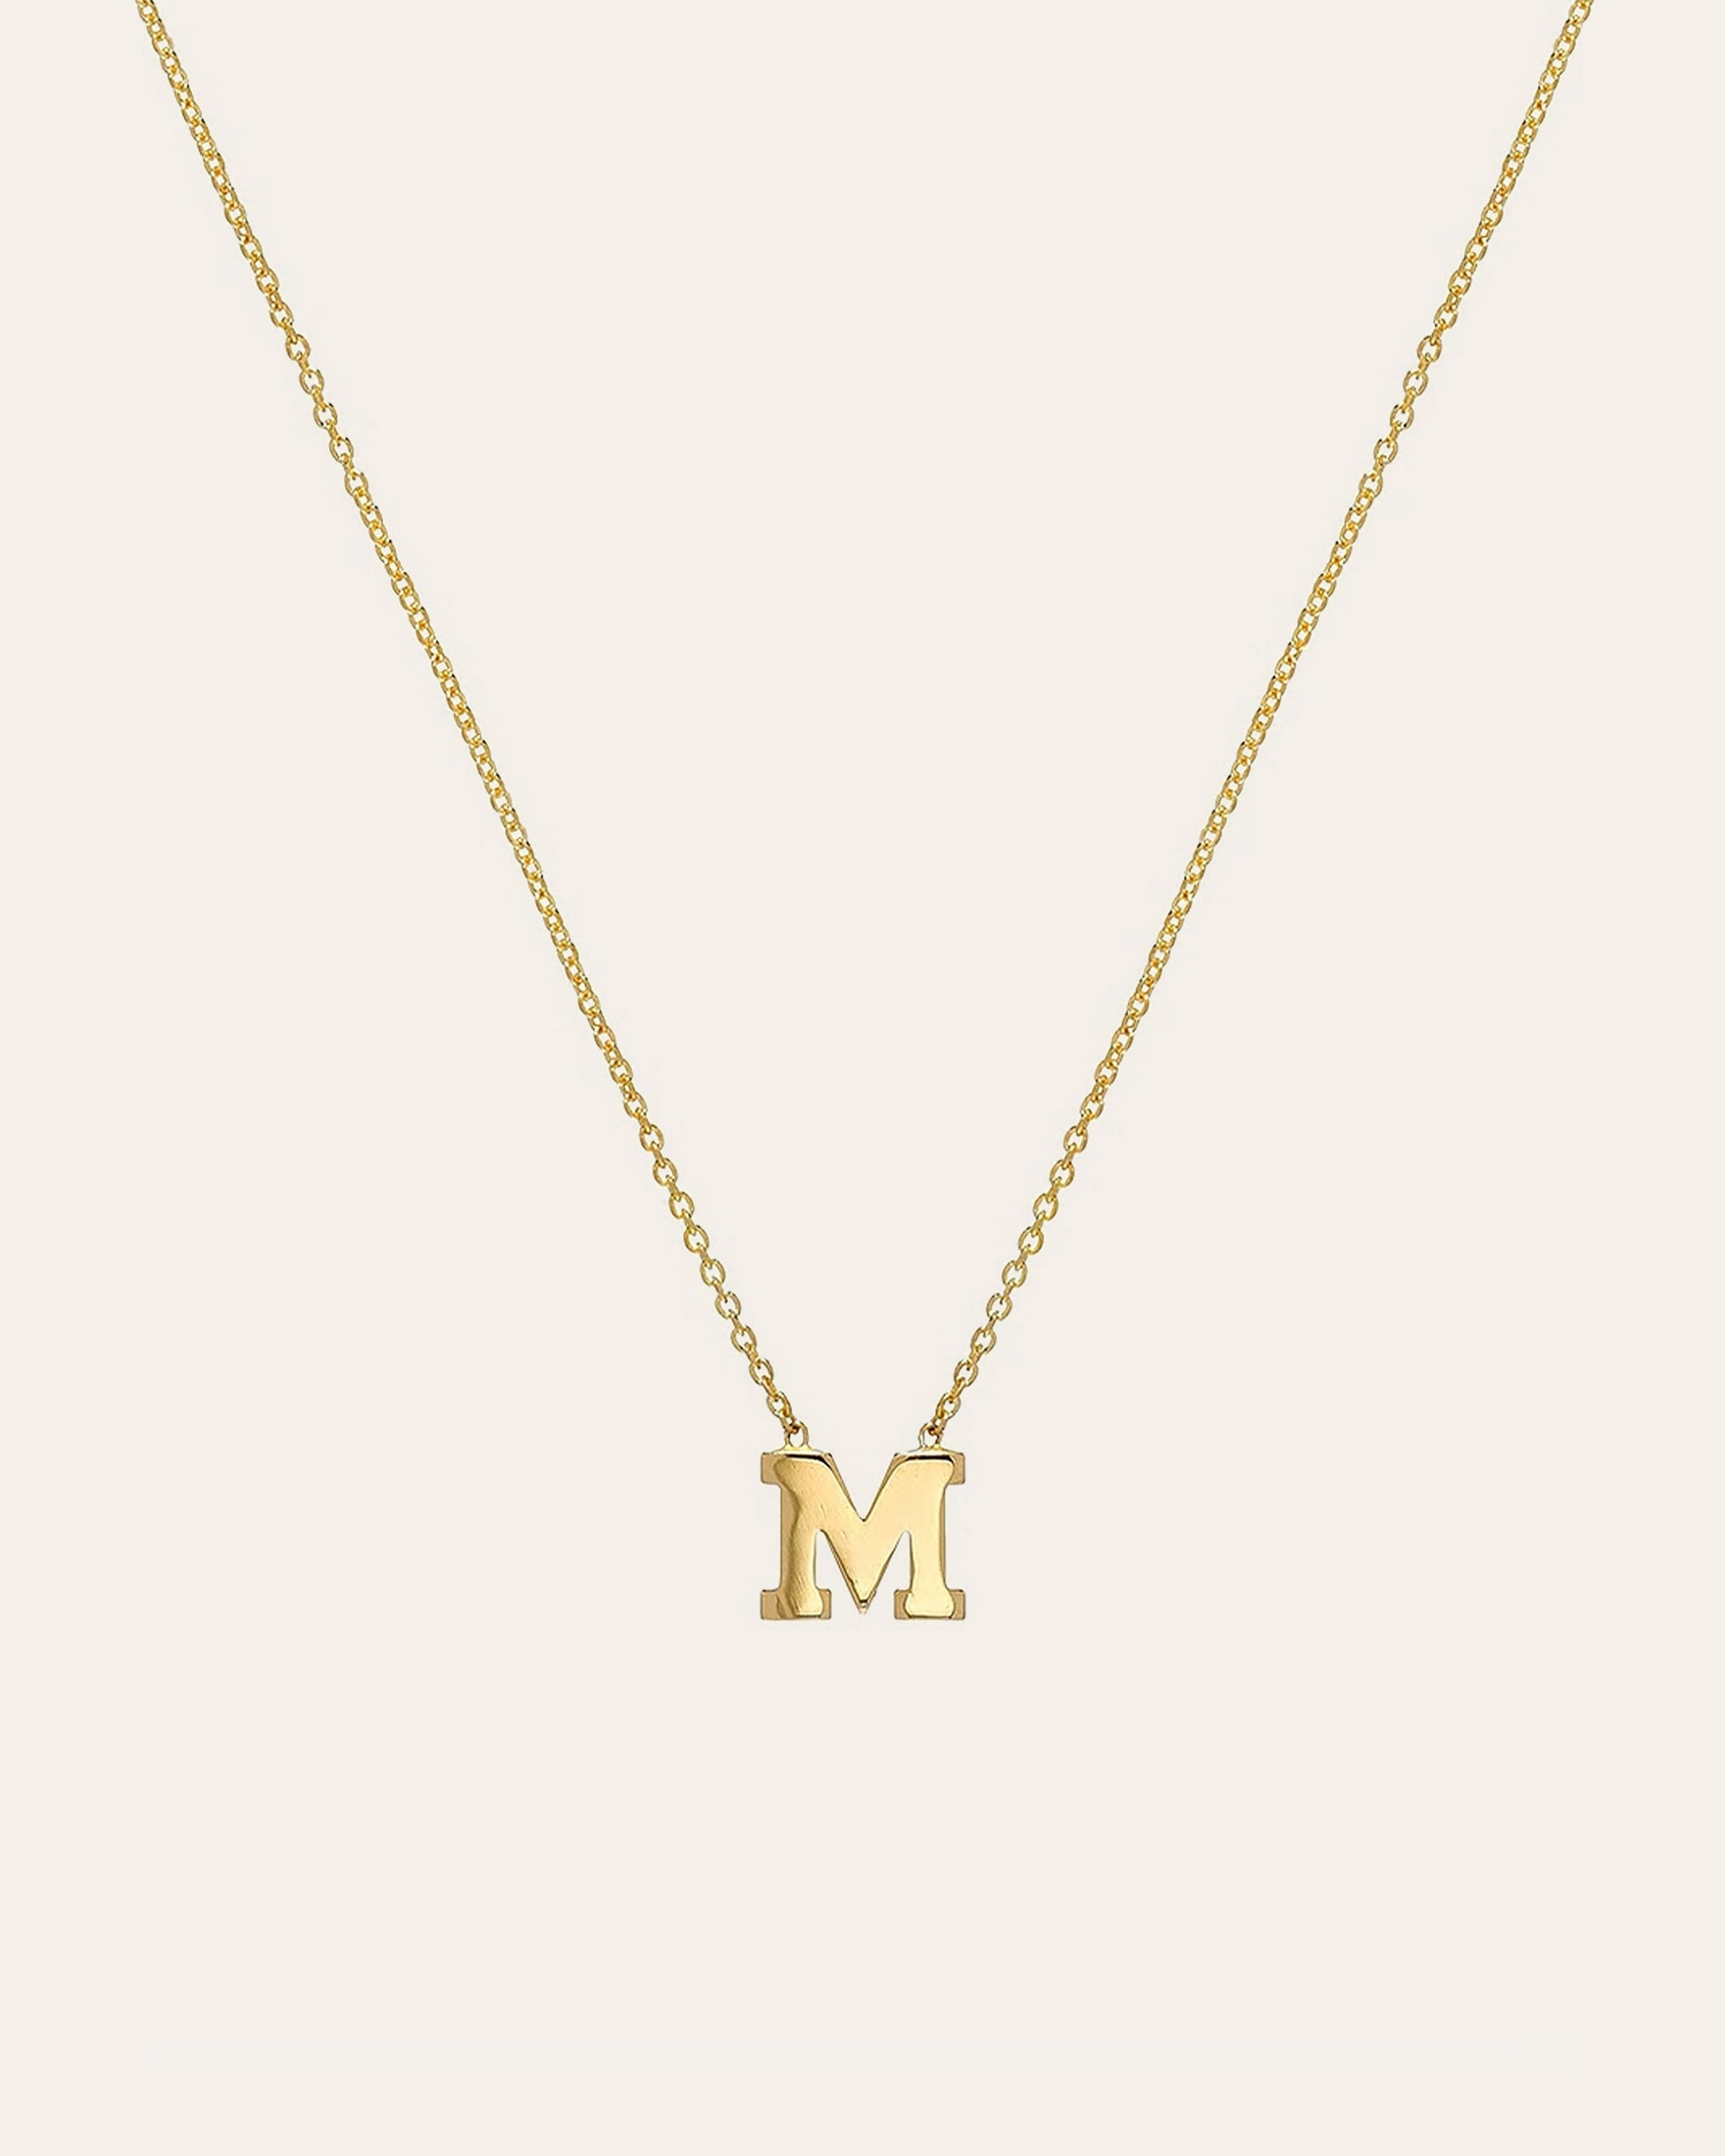 A Men's Guide To Selecting An Initial Necklace